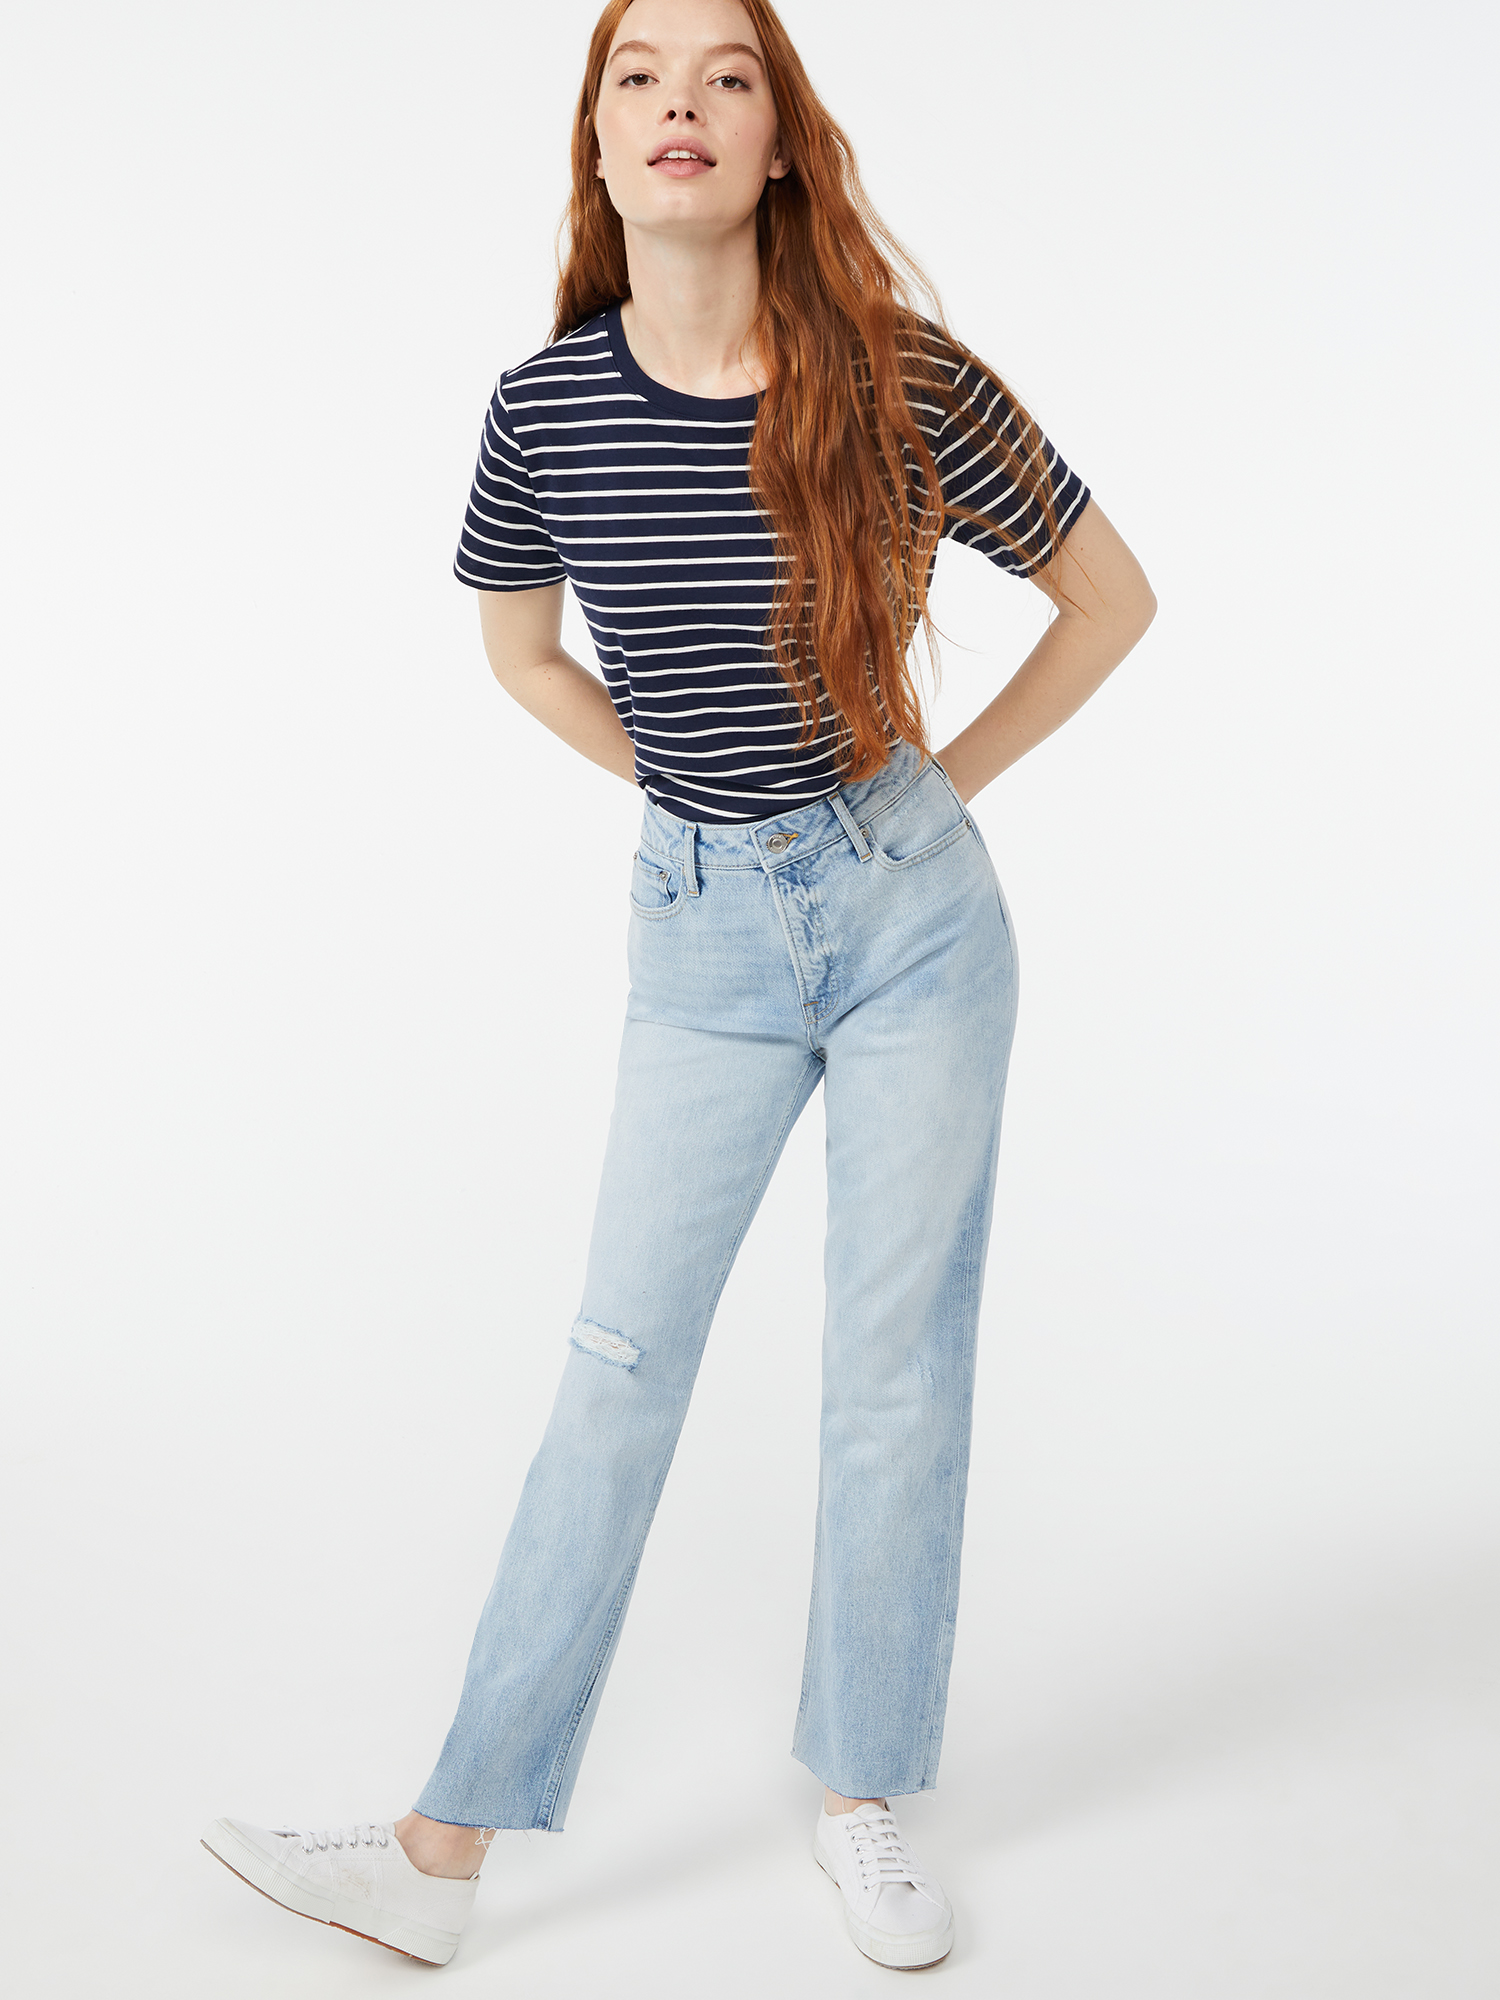 Free Assembly Women's Super High Rise Straight Jeans - image 3 of 5